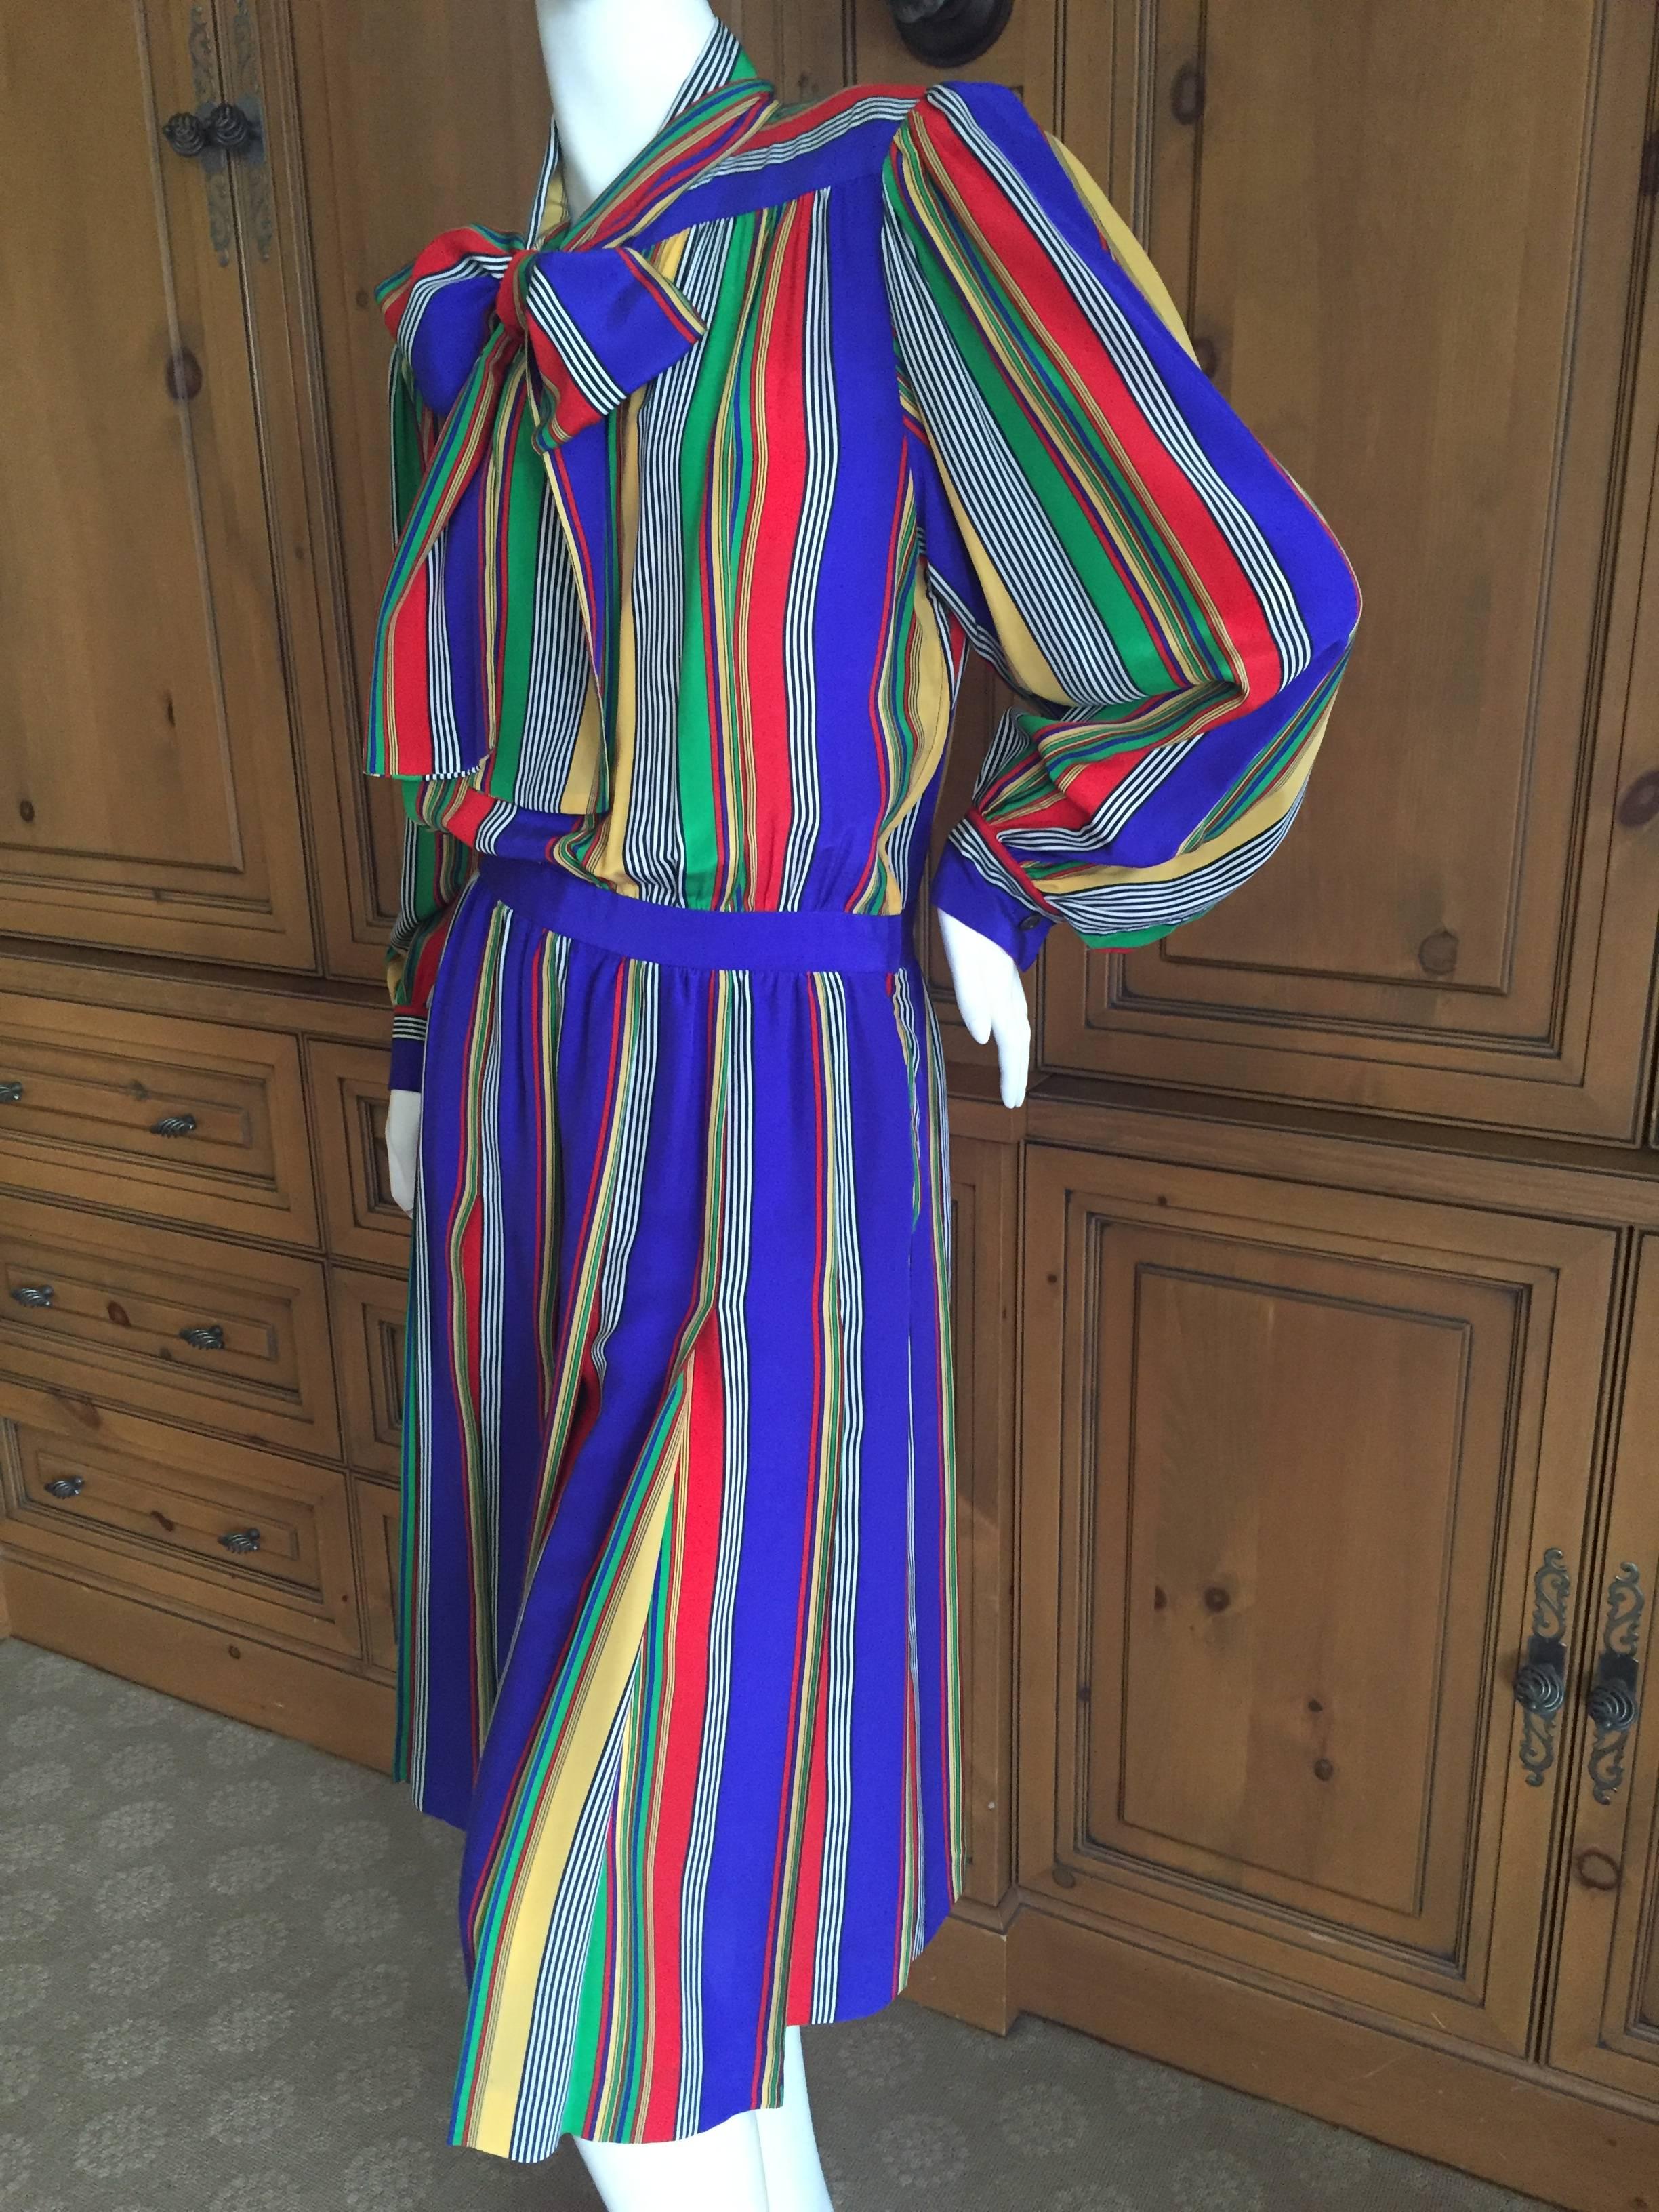 Yves Saint Laurent Rive Gauche 1970's Stripe Silk Day Dress with Bow In Excellent Condition For Sale In Cloverdale, CA